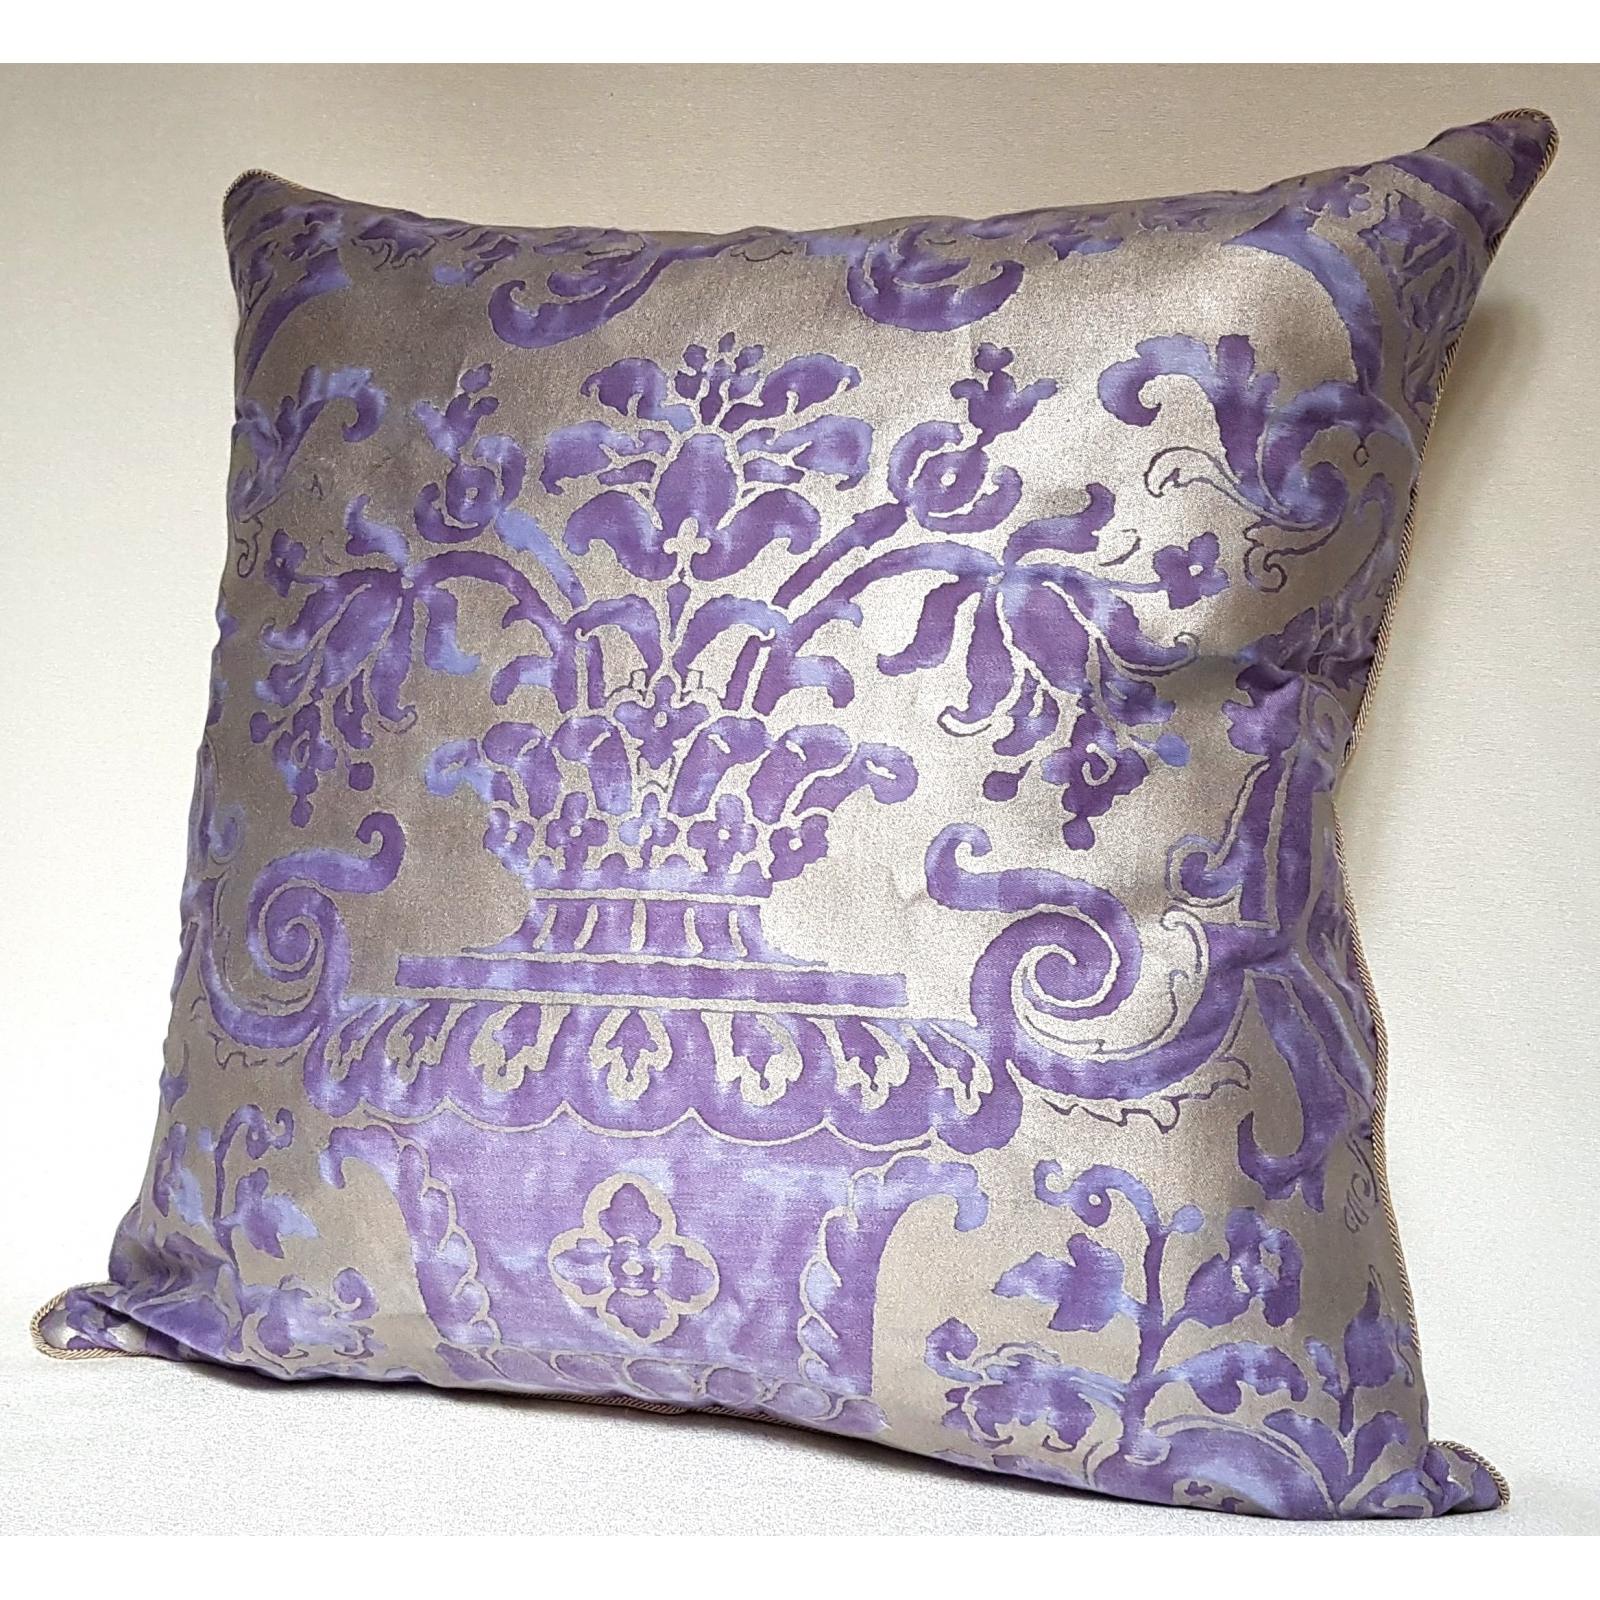 https://www.oggettiveneziani.com/5584-superlarge_default/throw-pillow-cushion-cover-fortuny-fabric-royal-purple-and-silvery-gold-carnavalet-pattern.jpg